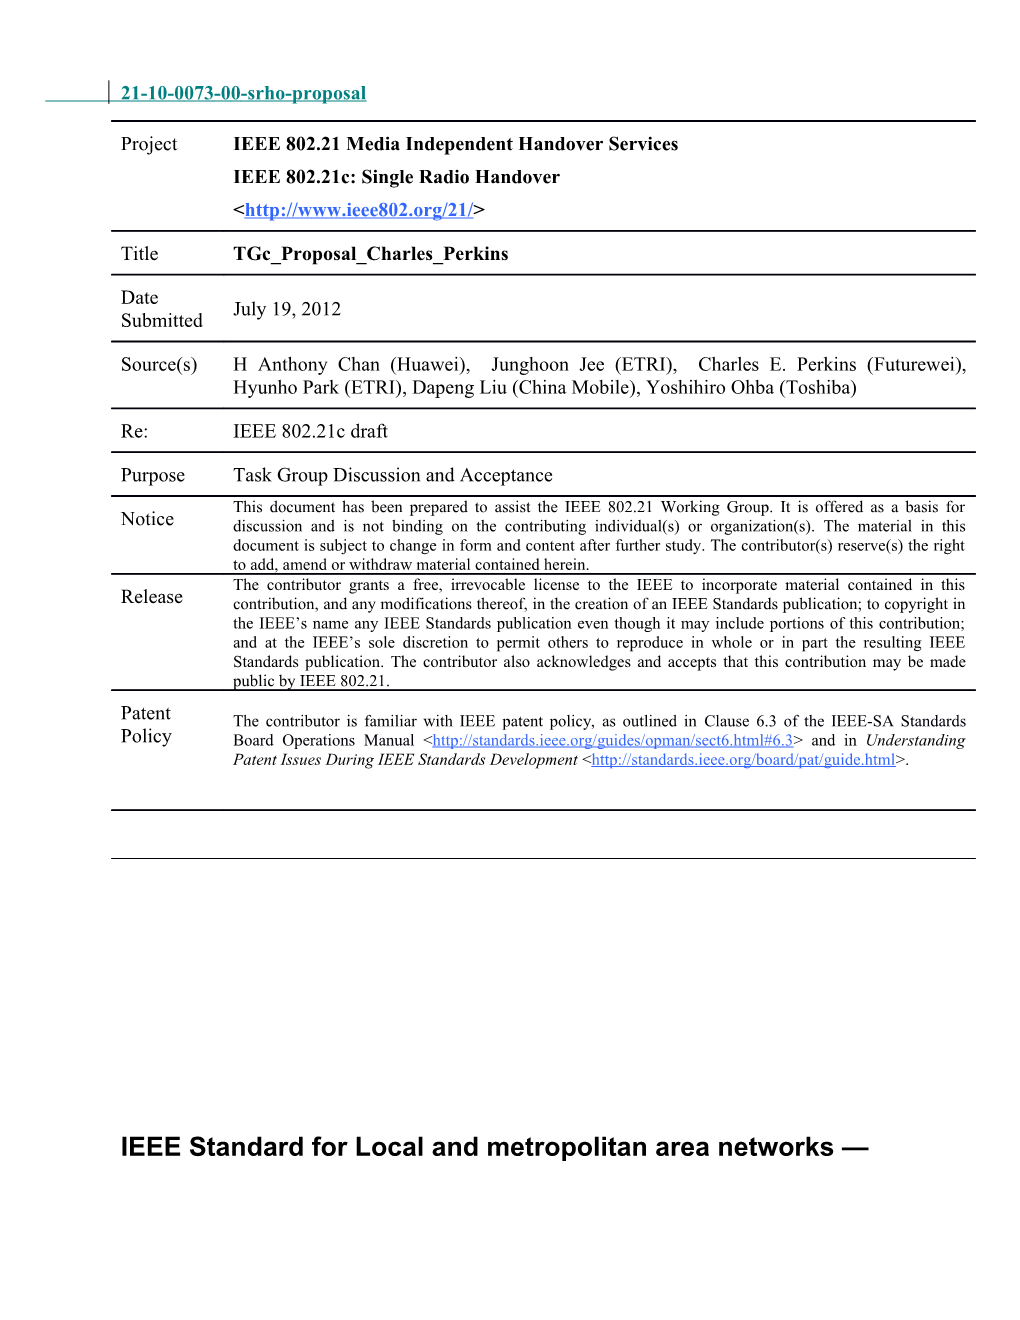 IEEE Standard for Local and Metropolitan Area Networks